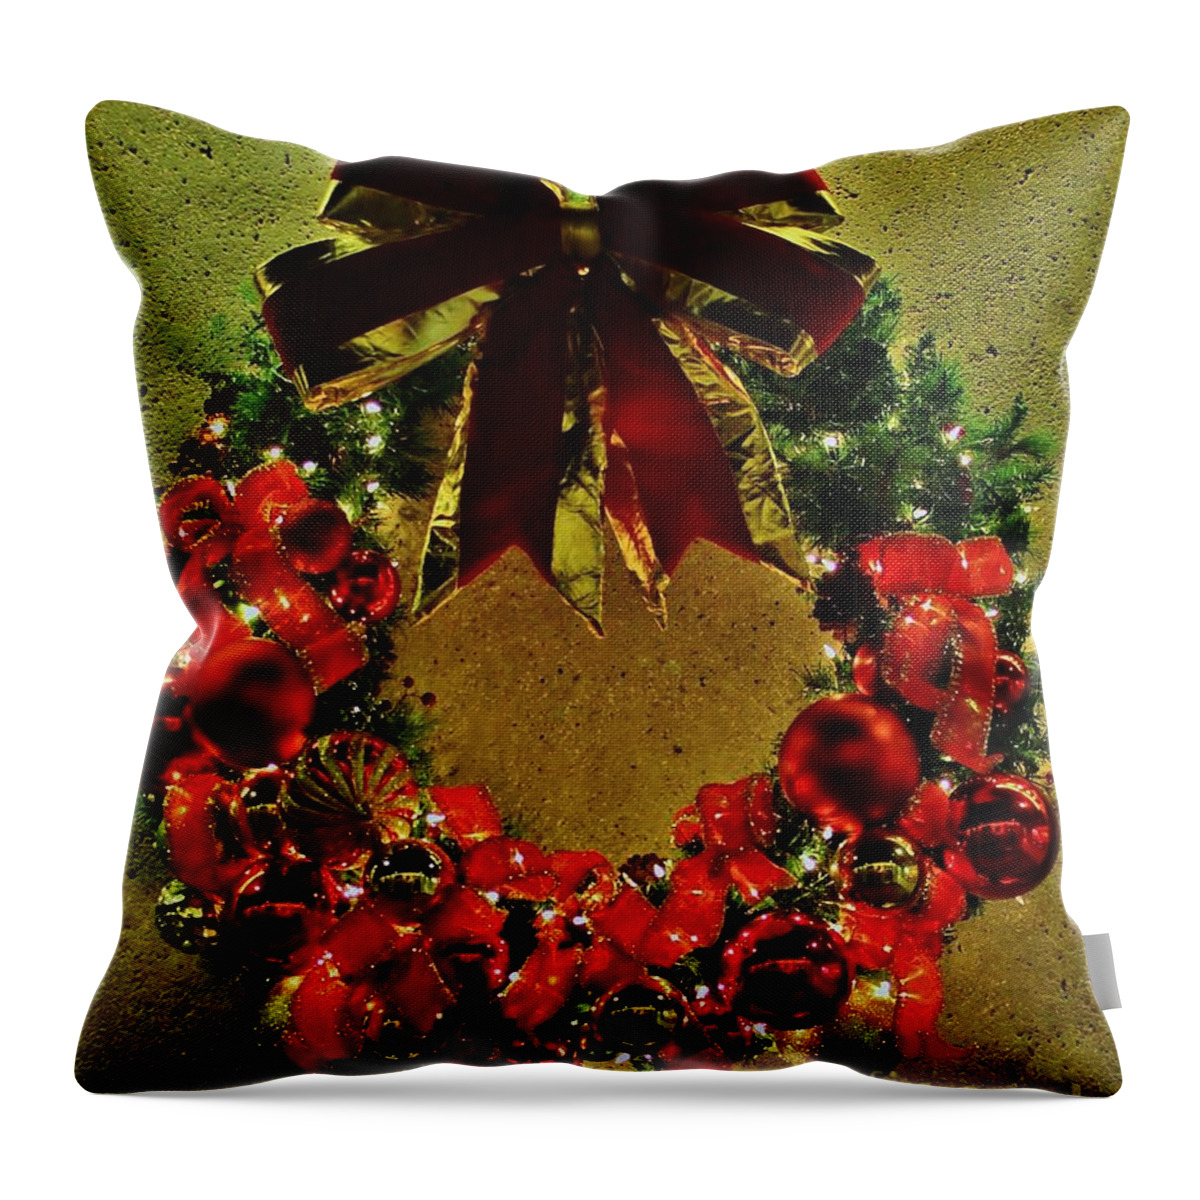 Wreath Throw Pillow featuring the photograph Merry Christmas by Craig Wood